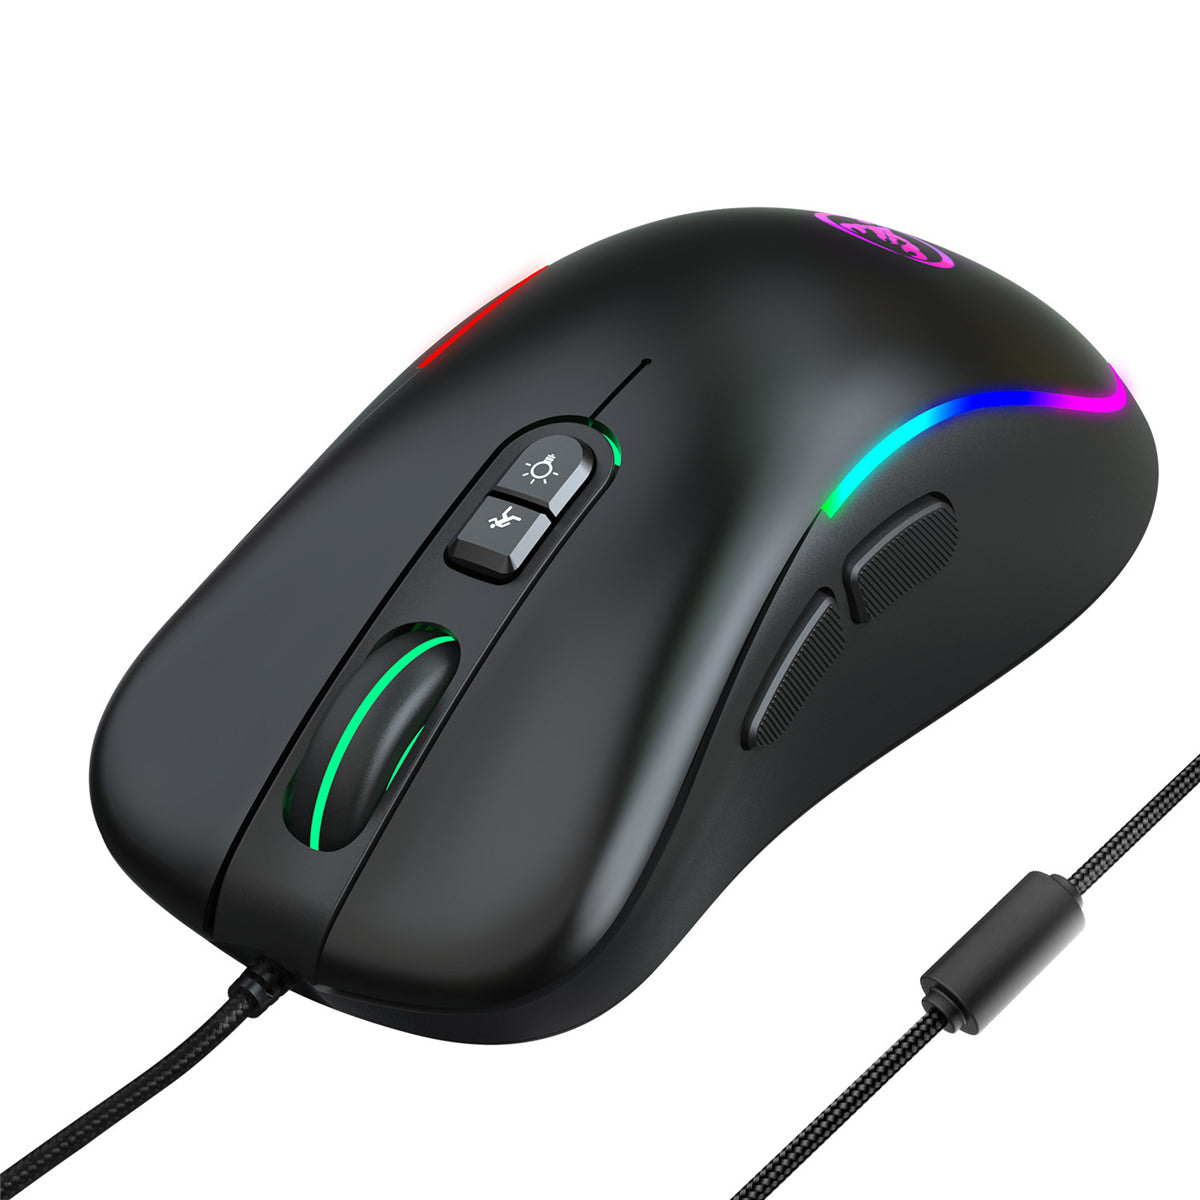 HXSJ J300 Wired Gaming Mouse 7 Button Macro Programming Mouse 6400DPI Colorful RGB Backlight USB Wired Mouse